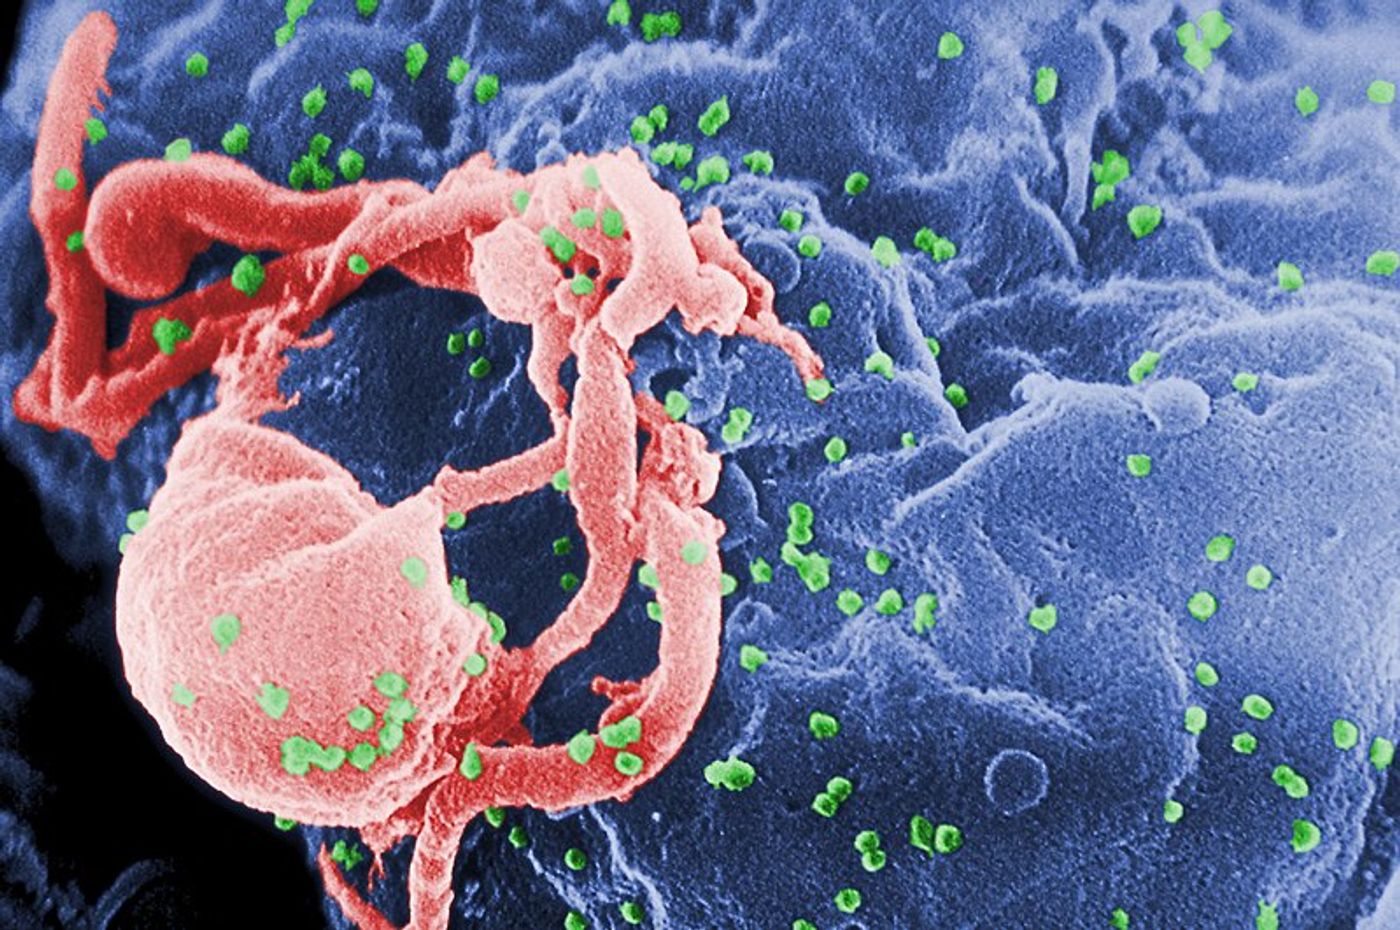 Scanning electron micrograph of HIV-1 budding (in green) from cultured lymphocyte. Credit: CDC